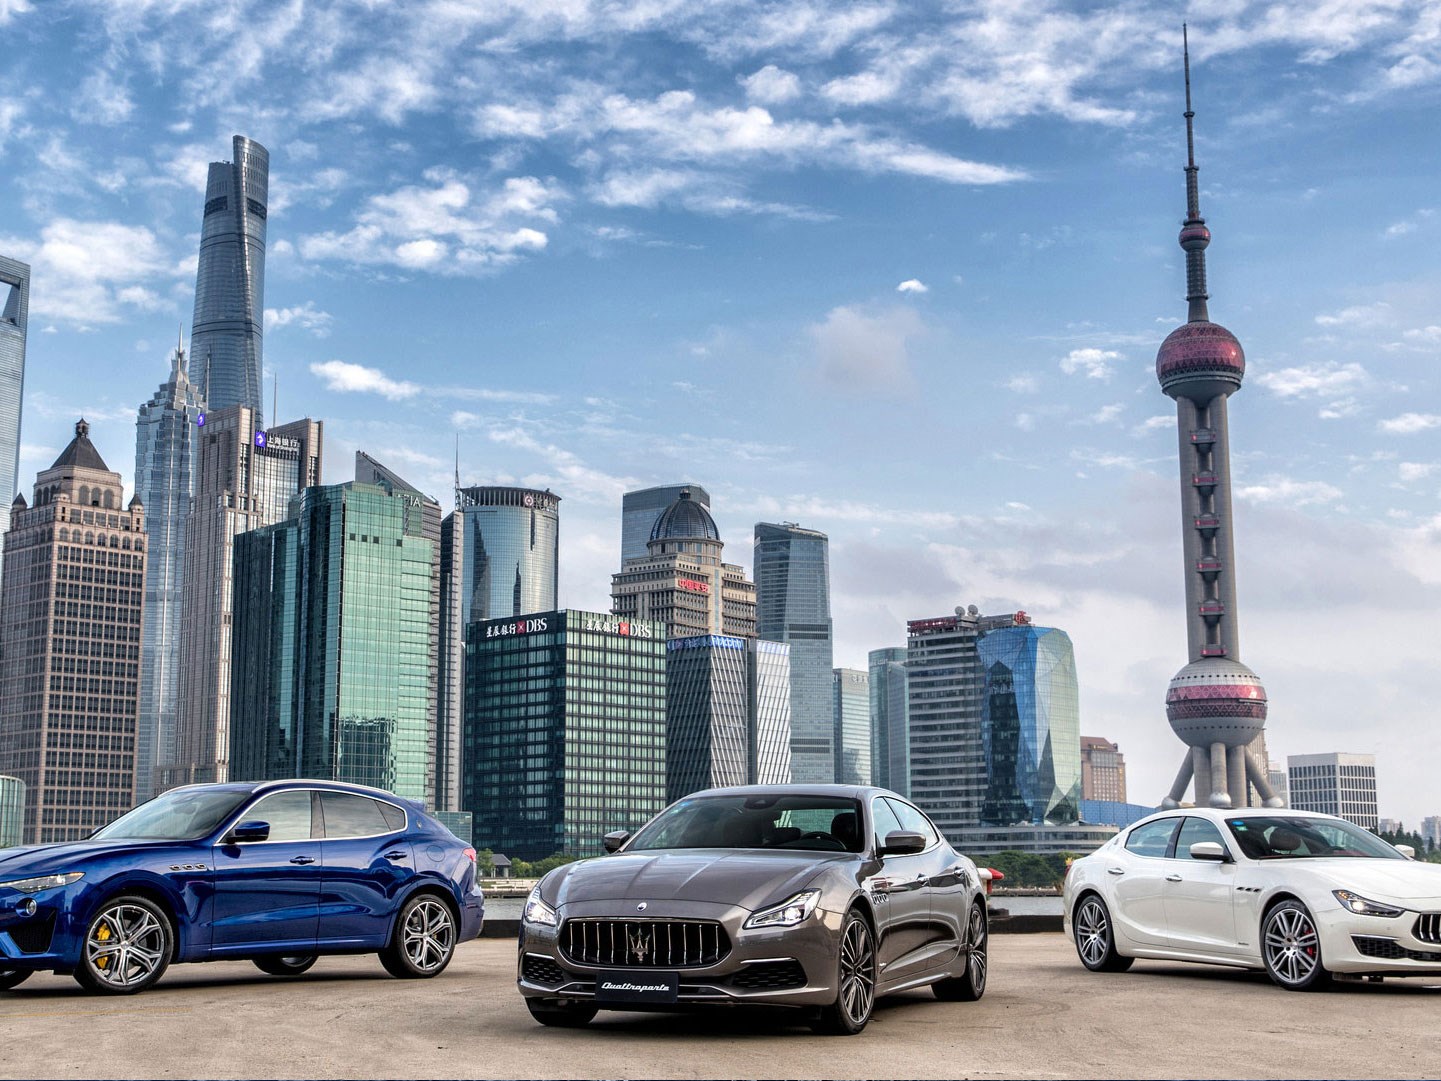 Maserati Celebrates its “Double Anniversary” with a Grand Tour in 2019